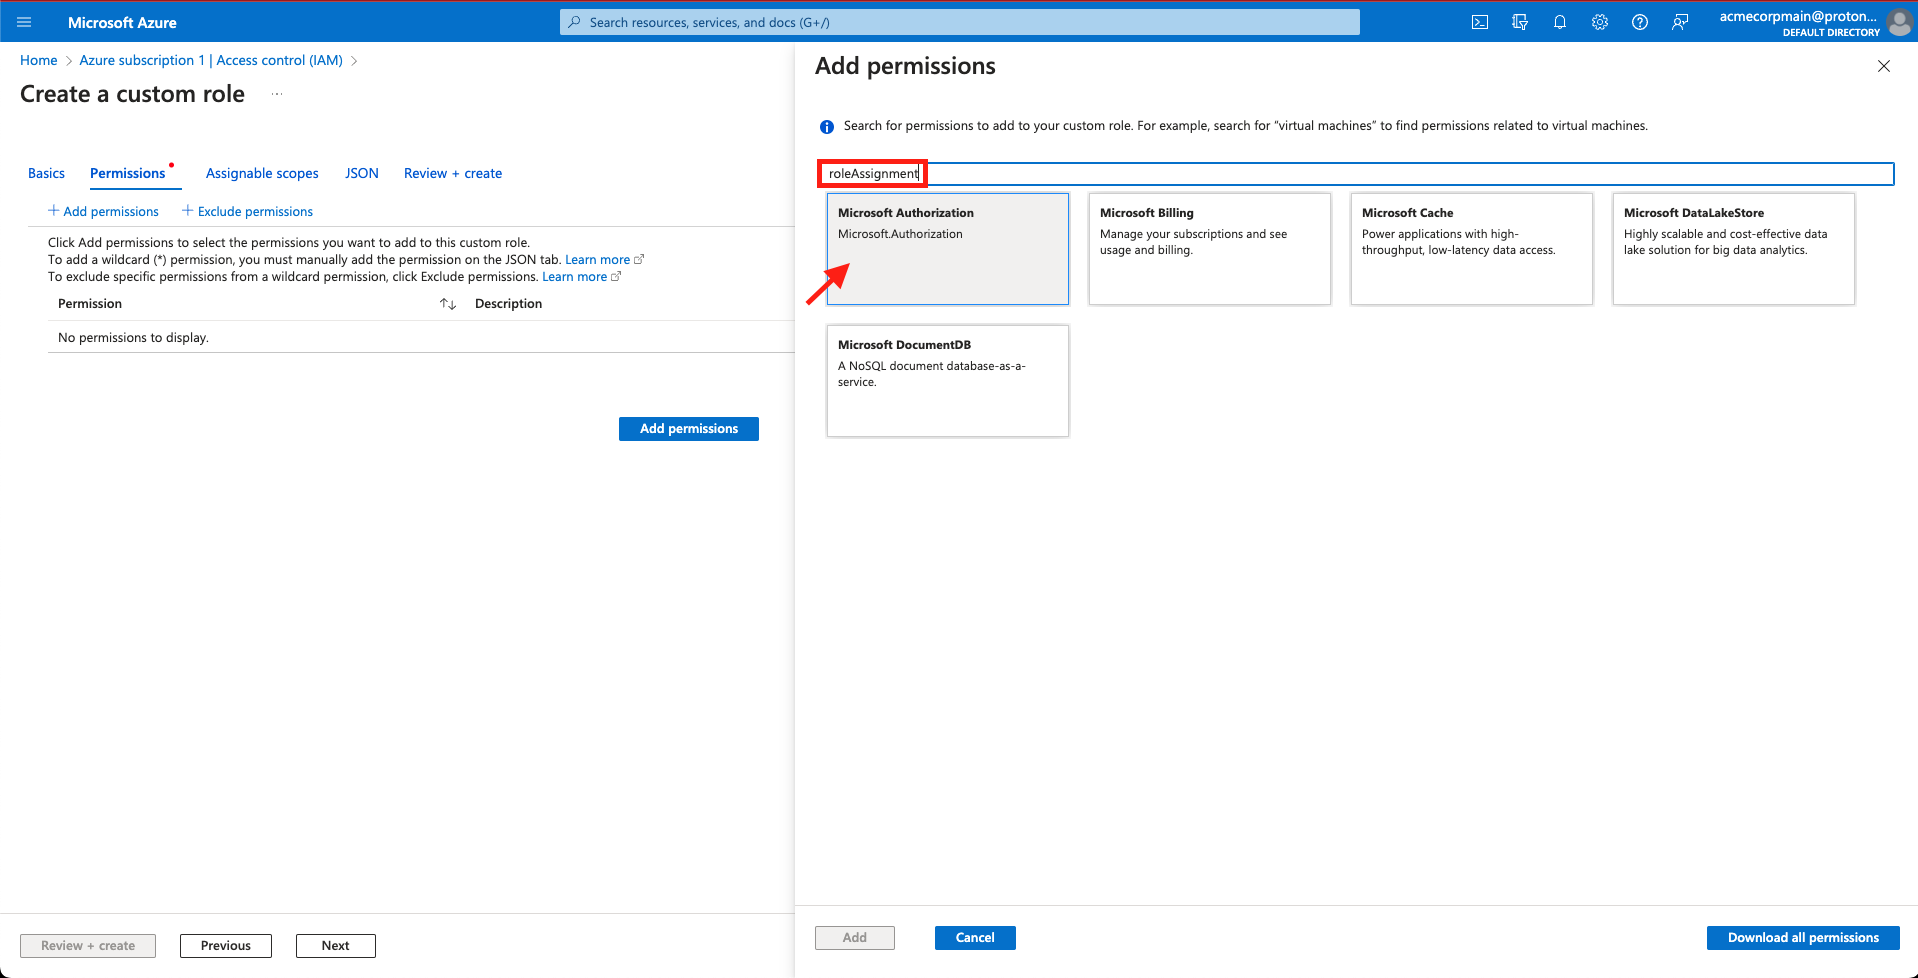 Search for and select 'Microsoft Authorization'